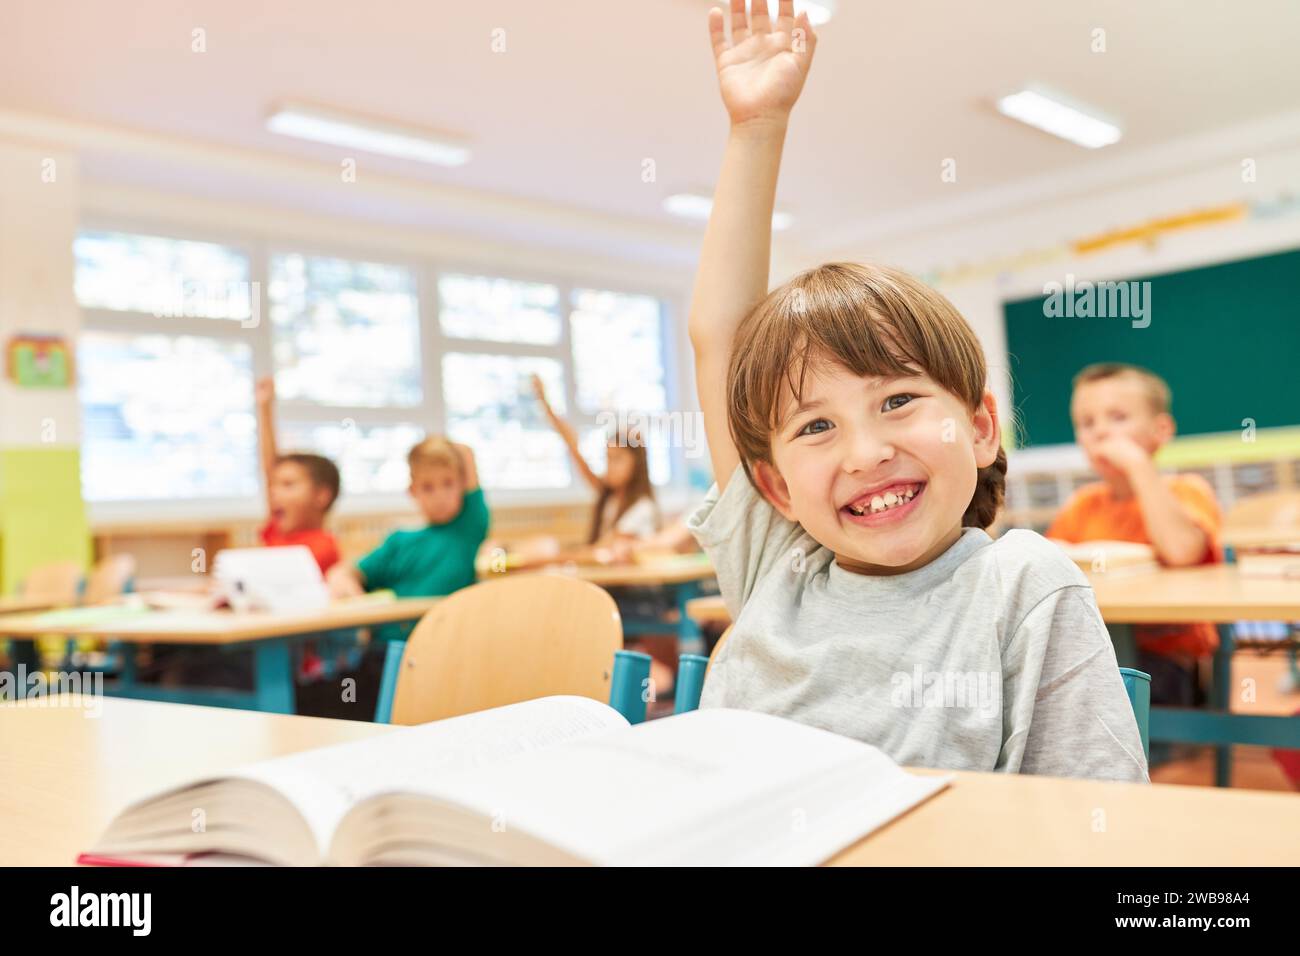 Portrait of smiling schoolgirl sitting with hand raised on bench during lecture in classroom Stock Photo